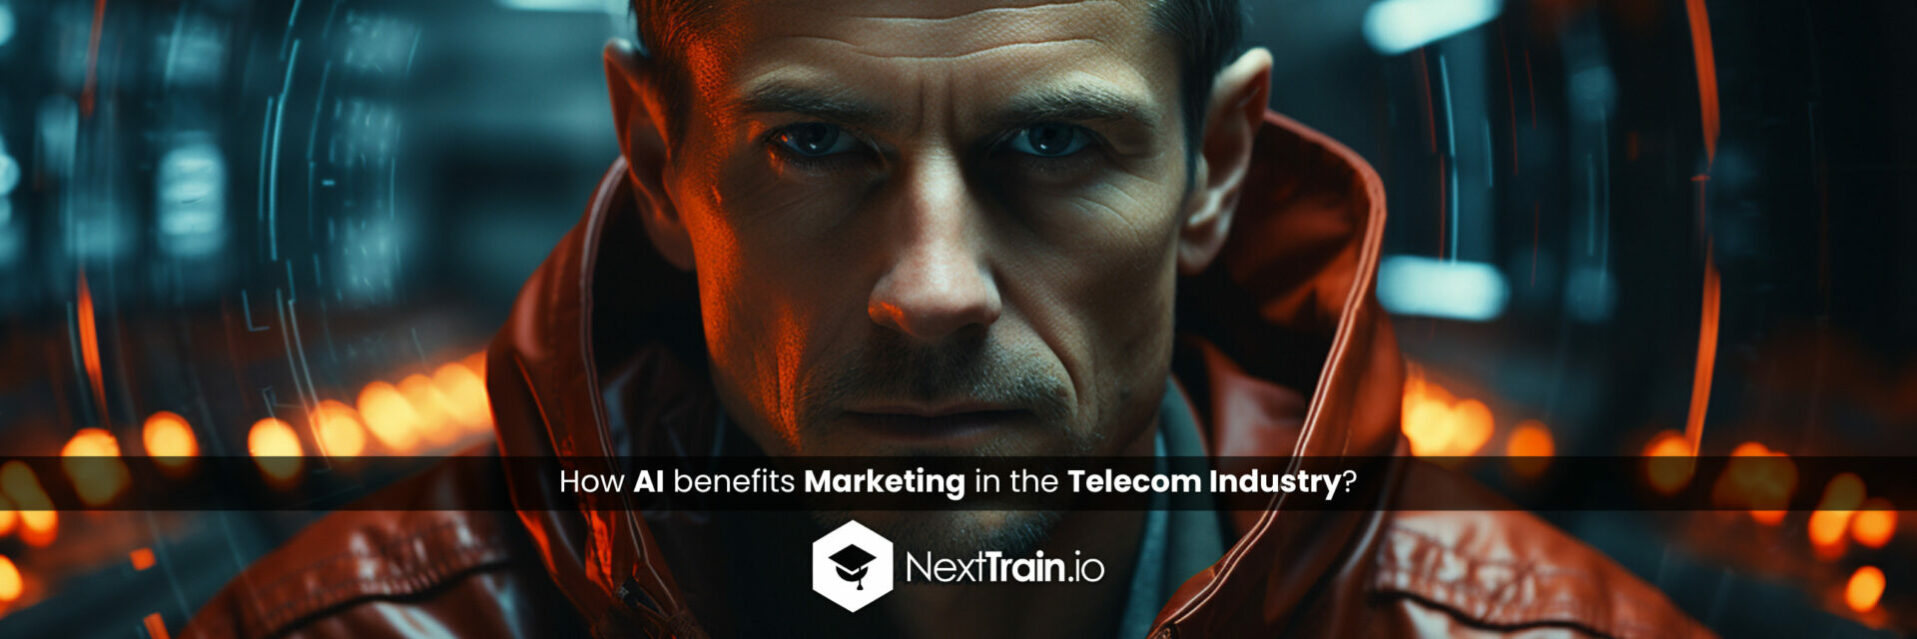 How AI benefits Marketing in the Telecom Industry?